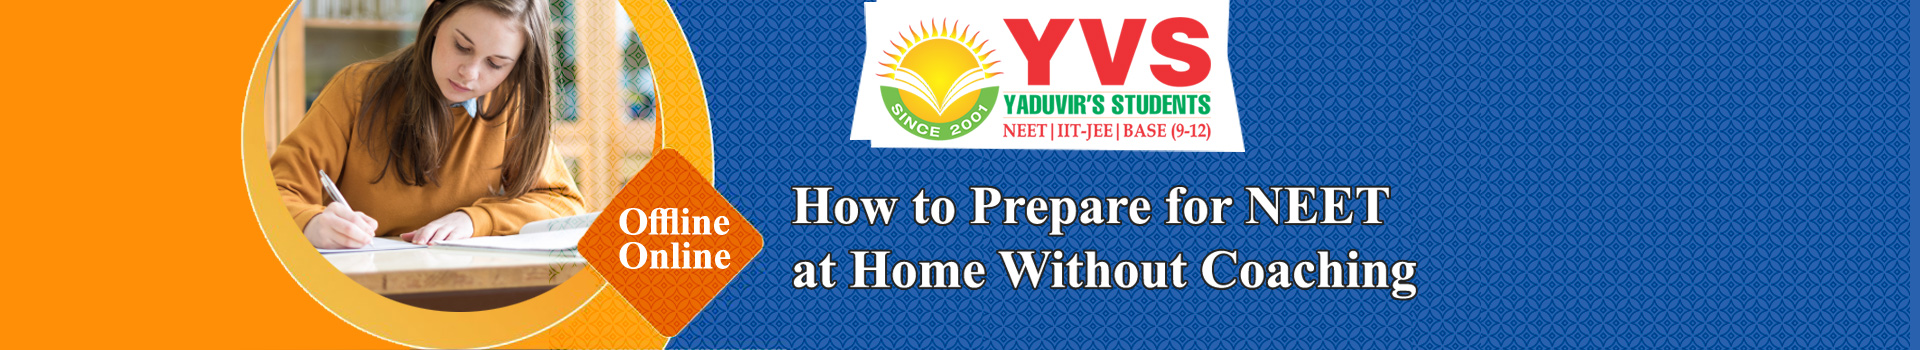 how-to-prepare-for-neet-at-home-without-coaching